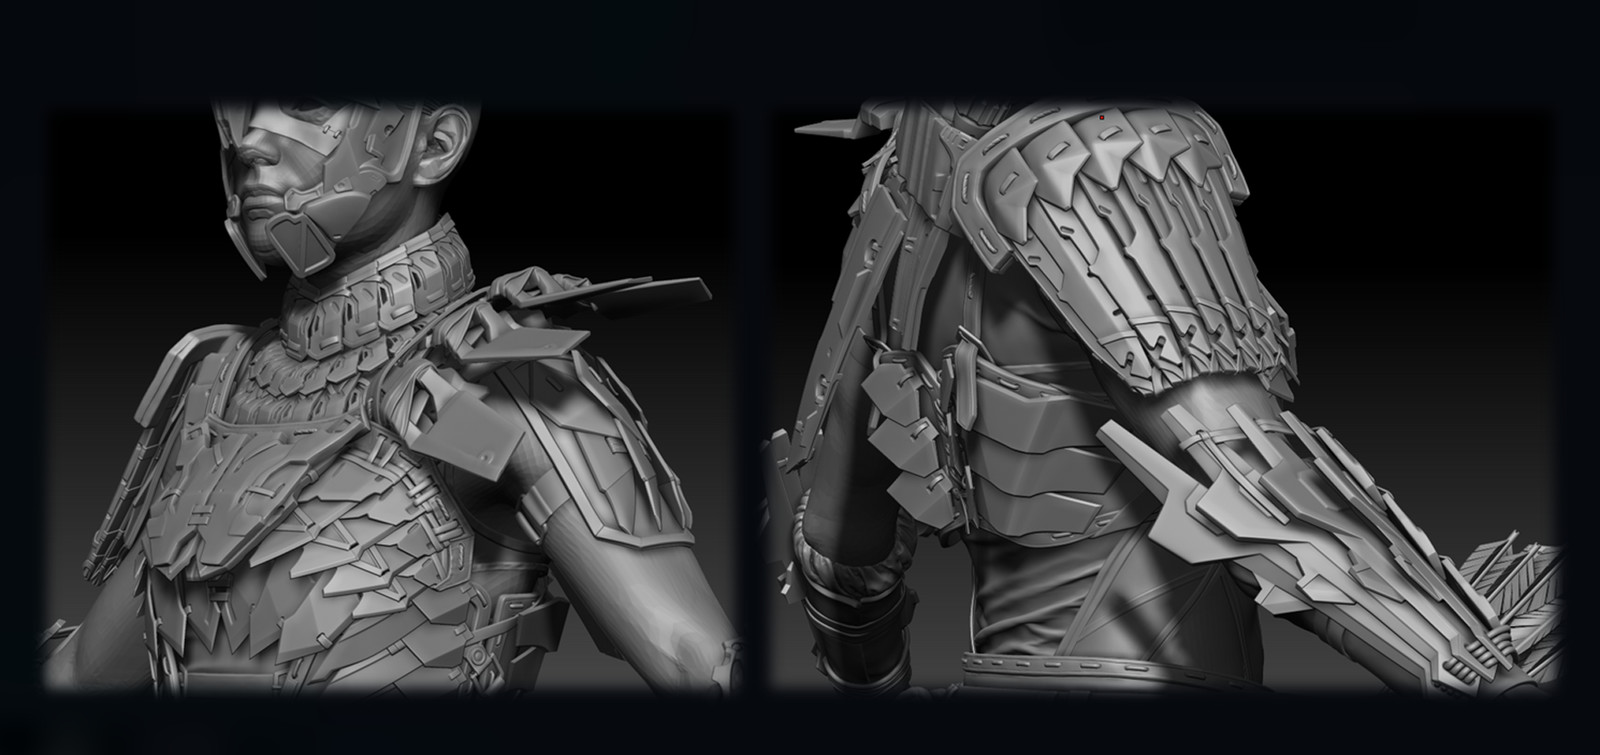 The challenge : imbrication between the more rigid armor and the softer clothing. The armor had to be aesthetically pleasing while looking realistic. The pieces need to interlock at various positions for varied situations and not restrain combat movements